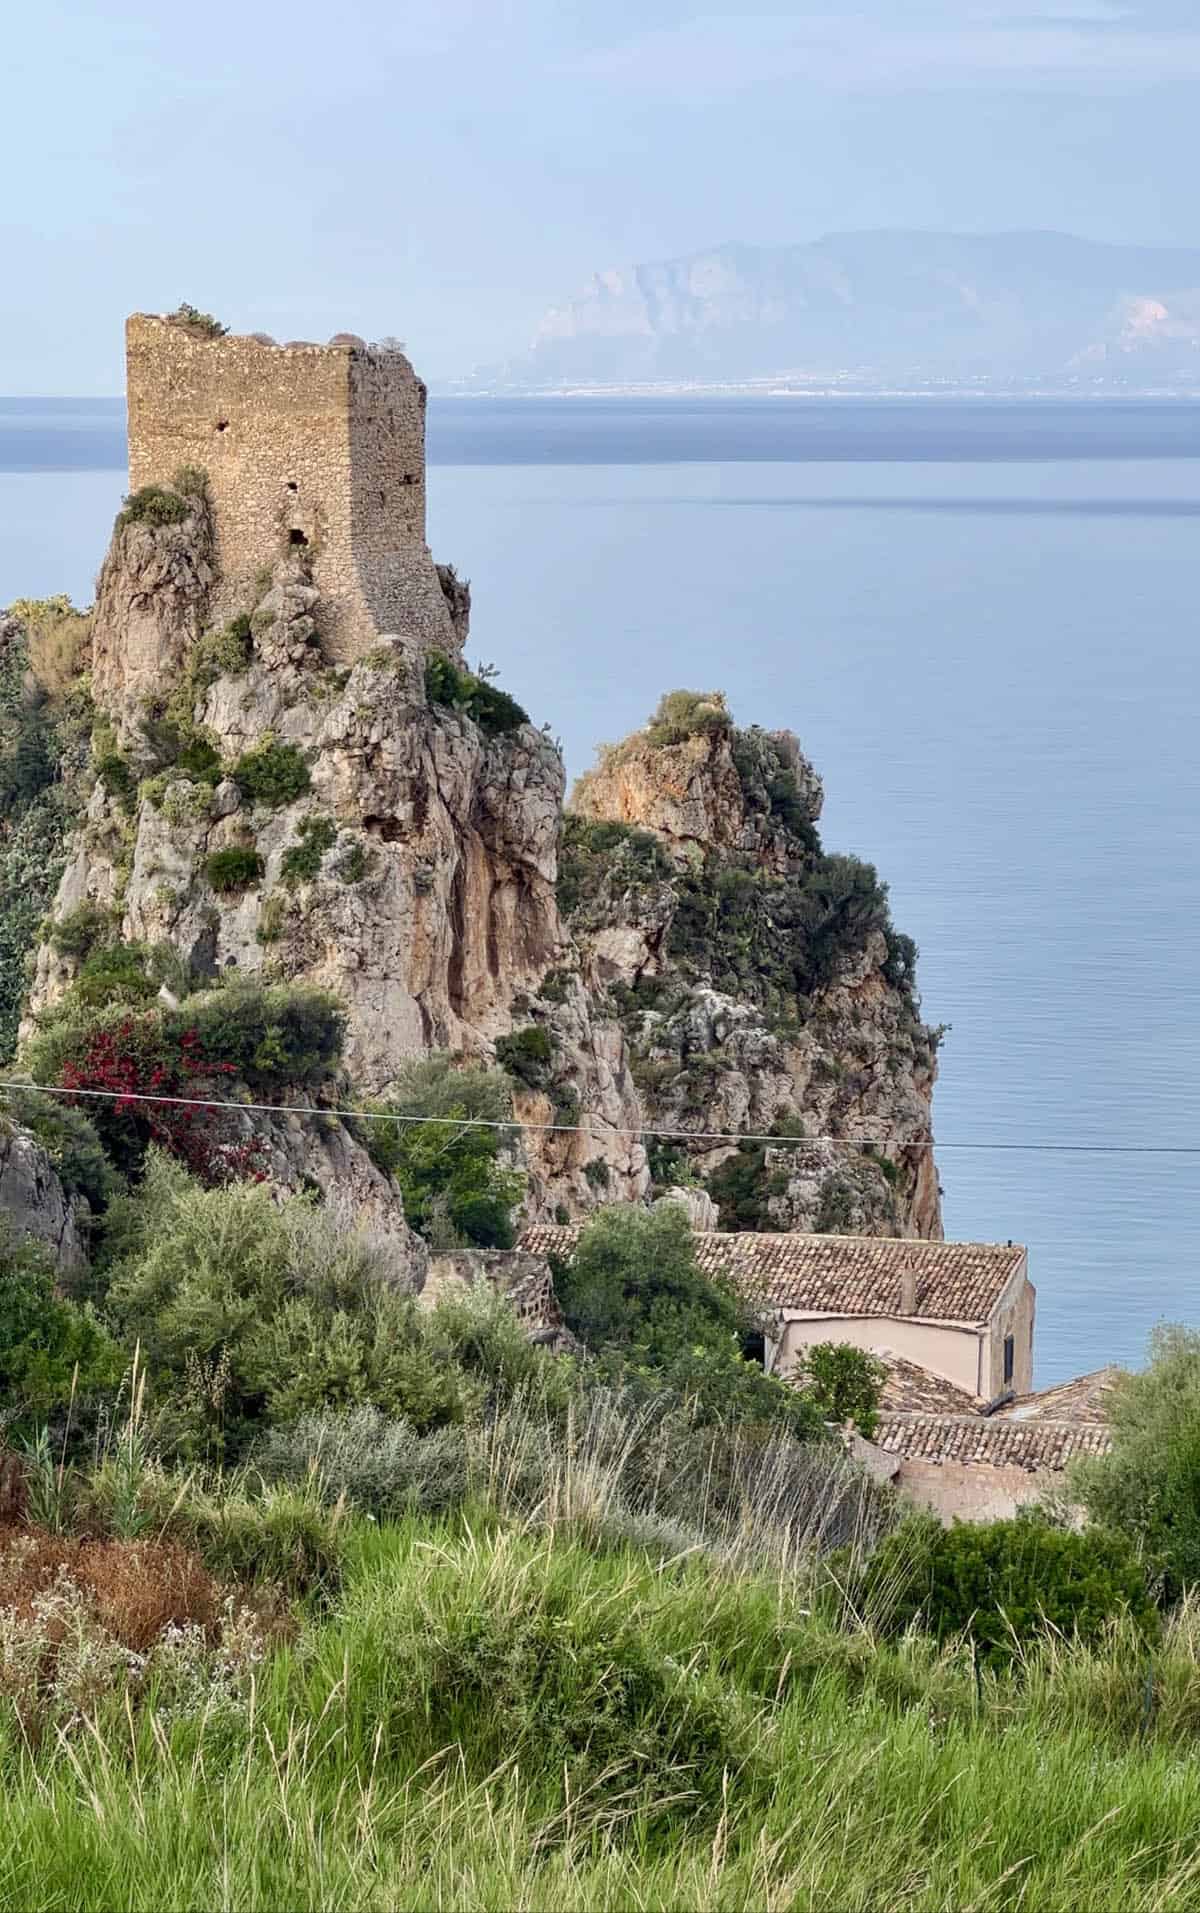 An image of the Torre and Tonnara Di Scopello in Sicily with the ocean in the background